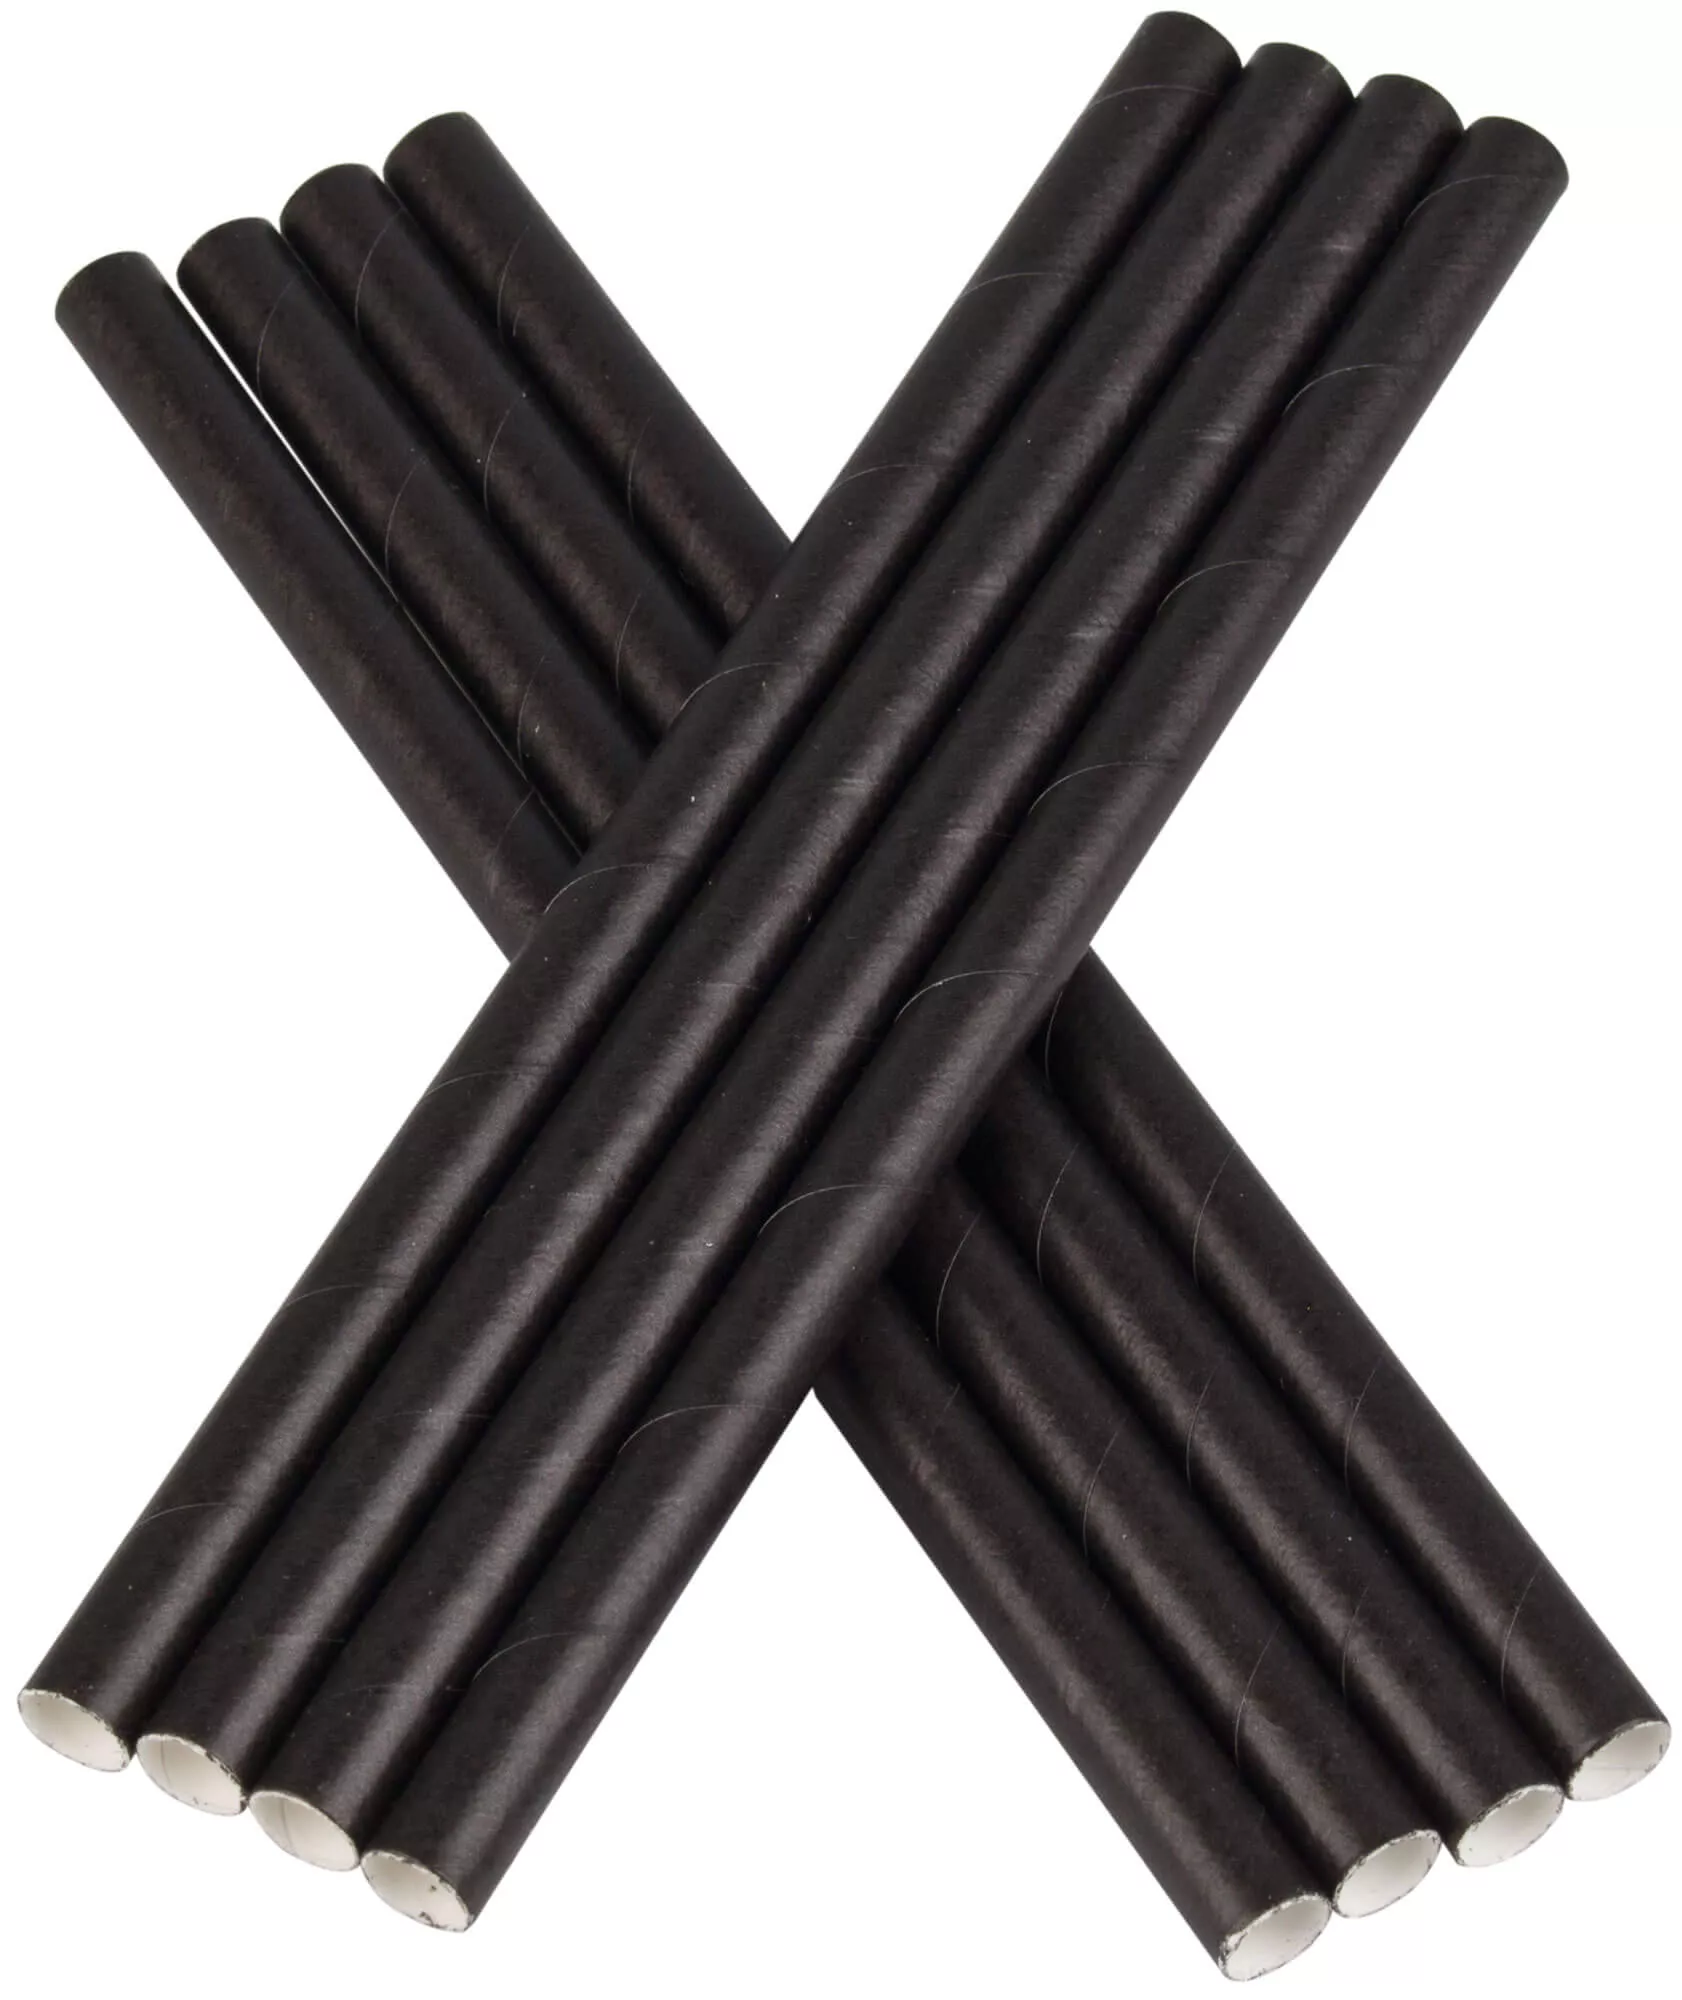 Drinking straws for your home and bar - excellently quality